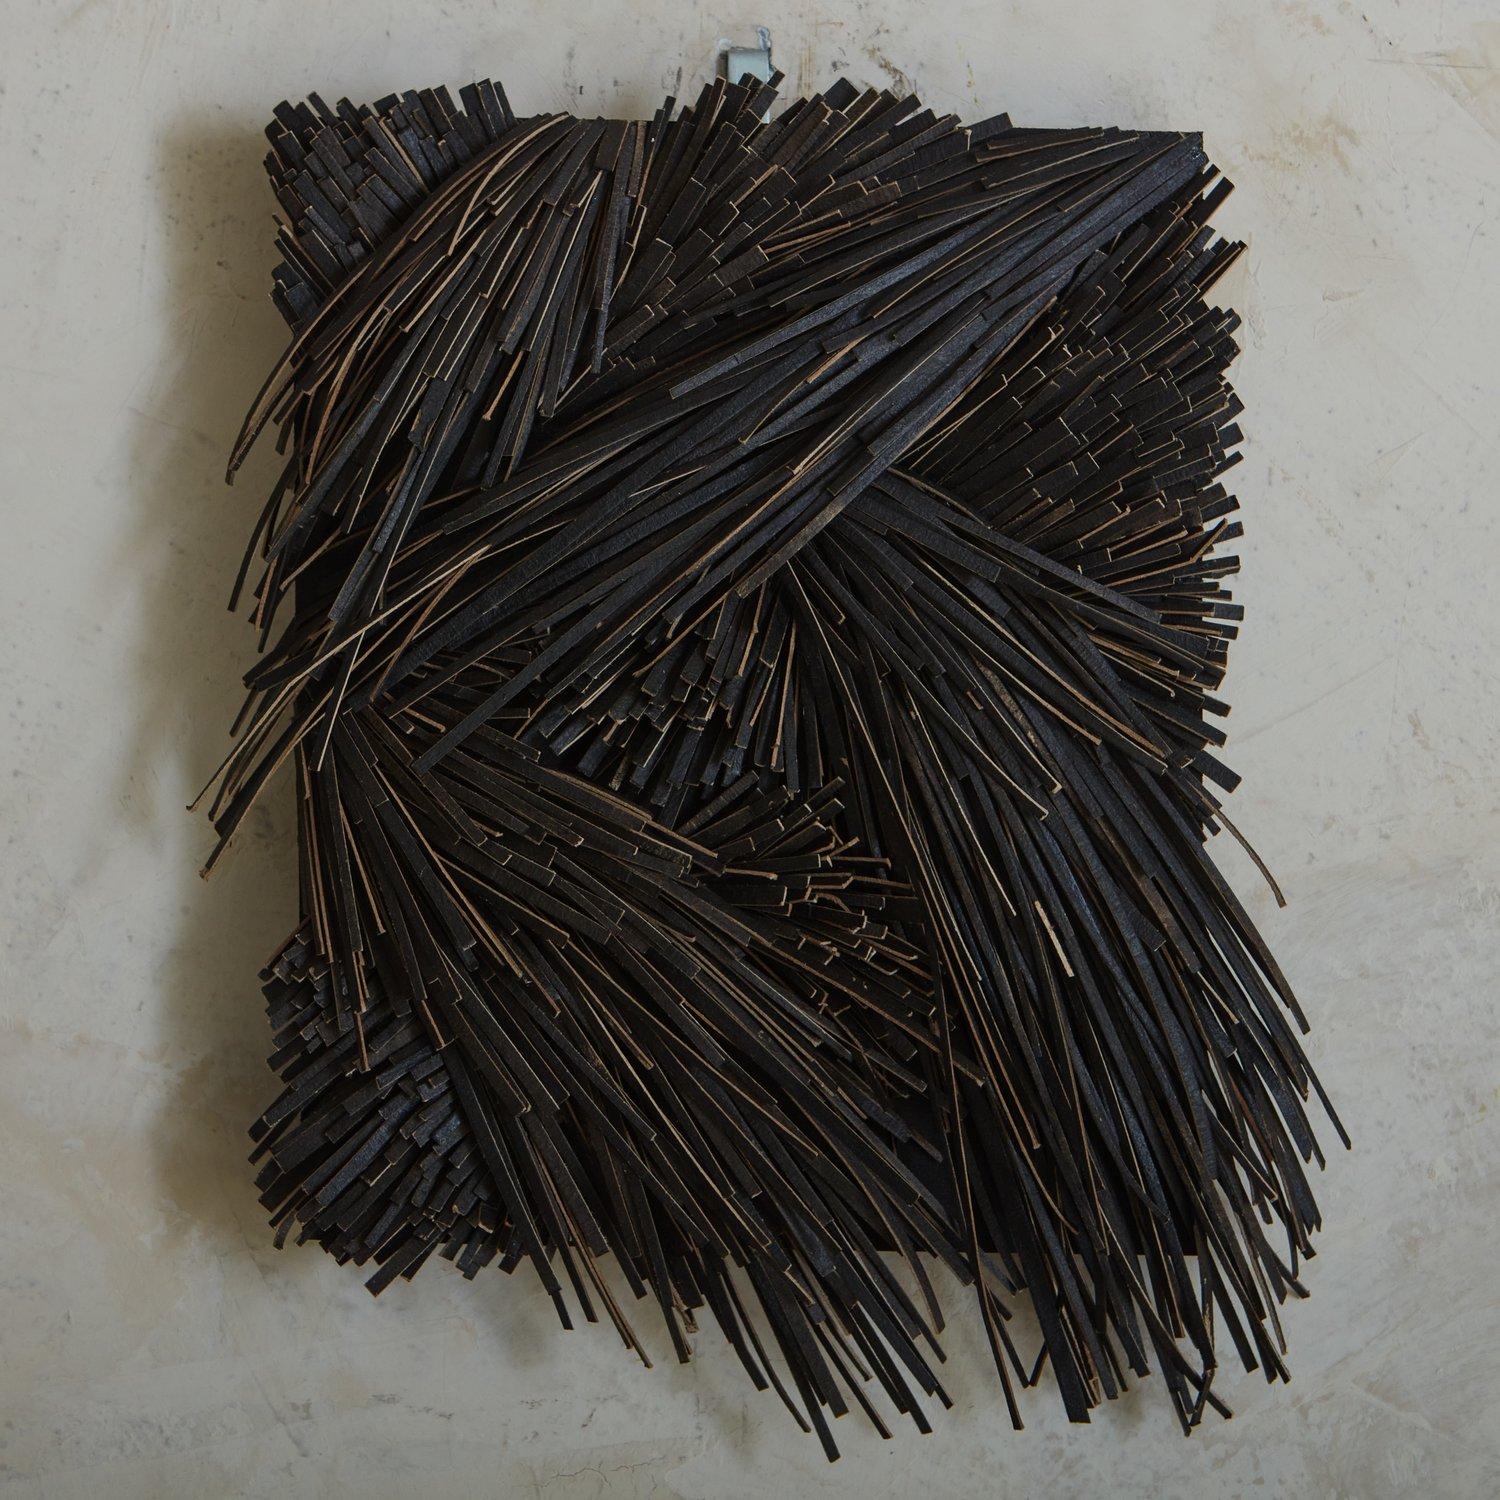 A textural wall sculpture made from recycled cardboard, ink, acrylic and wood by Canadian artist Erin Vincent. Signed and dated en verso. Hanging hardware included.

Erin Vincent is a Canadian artist who creates sculptural wall art and